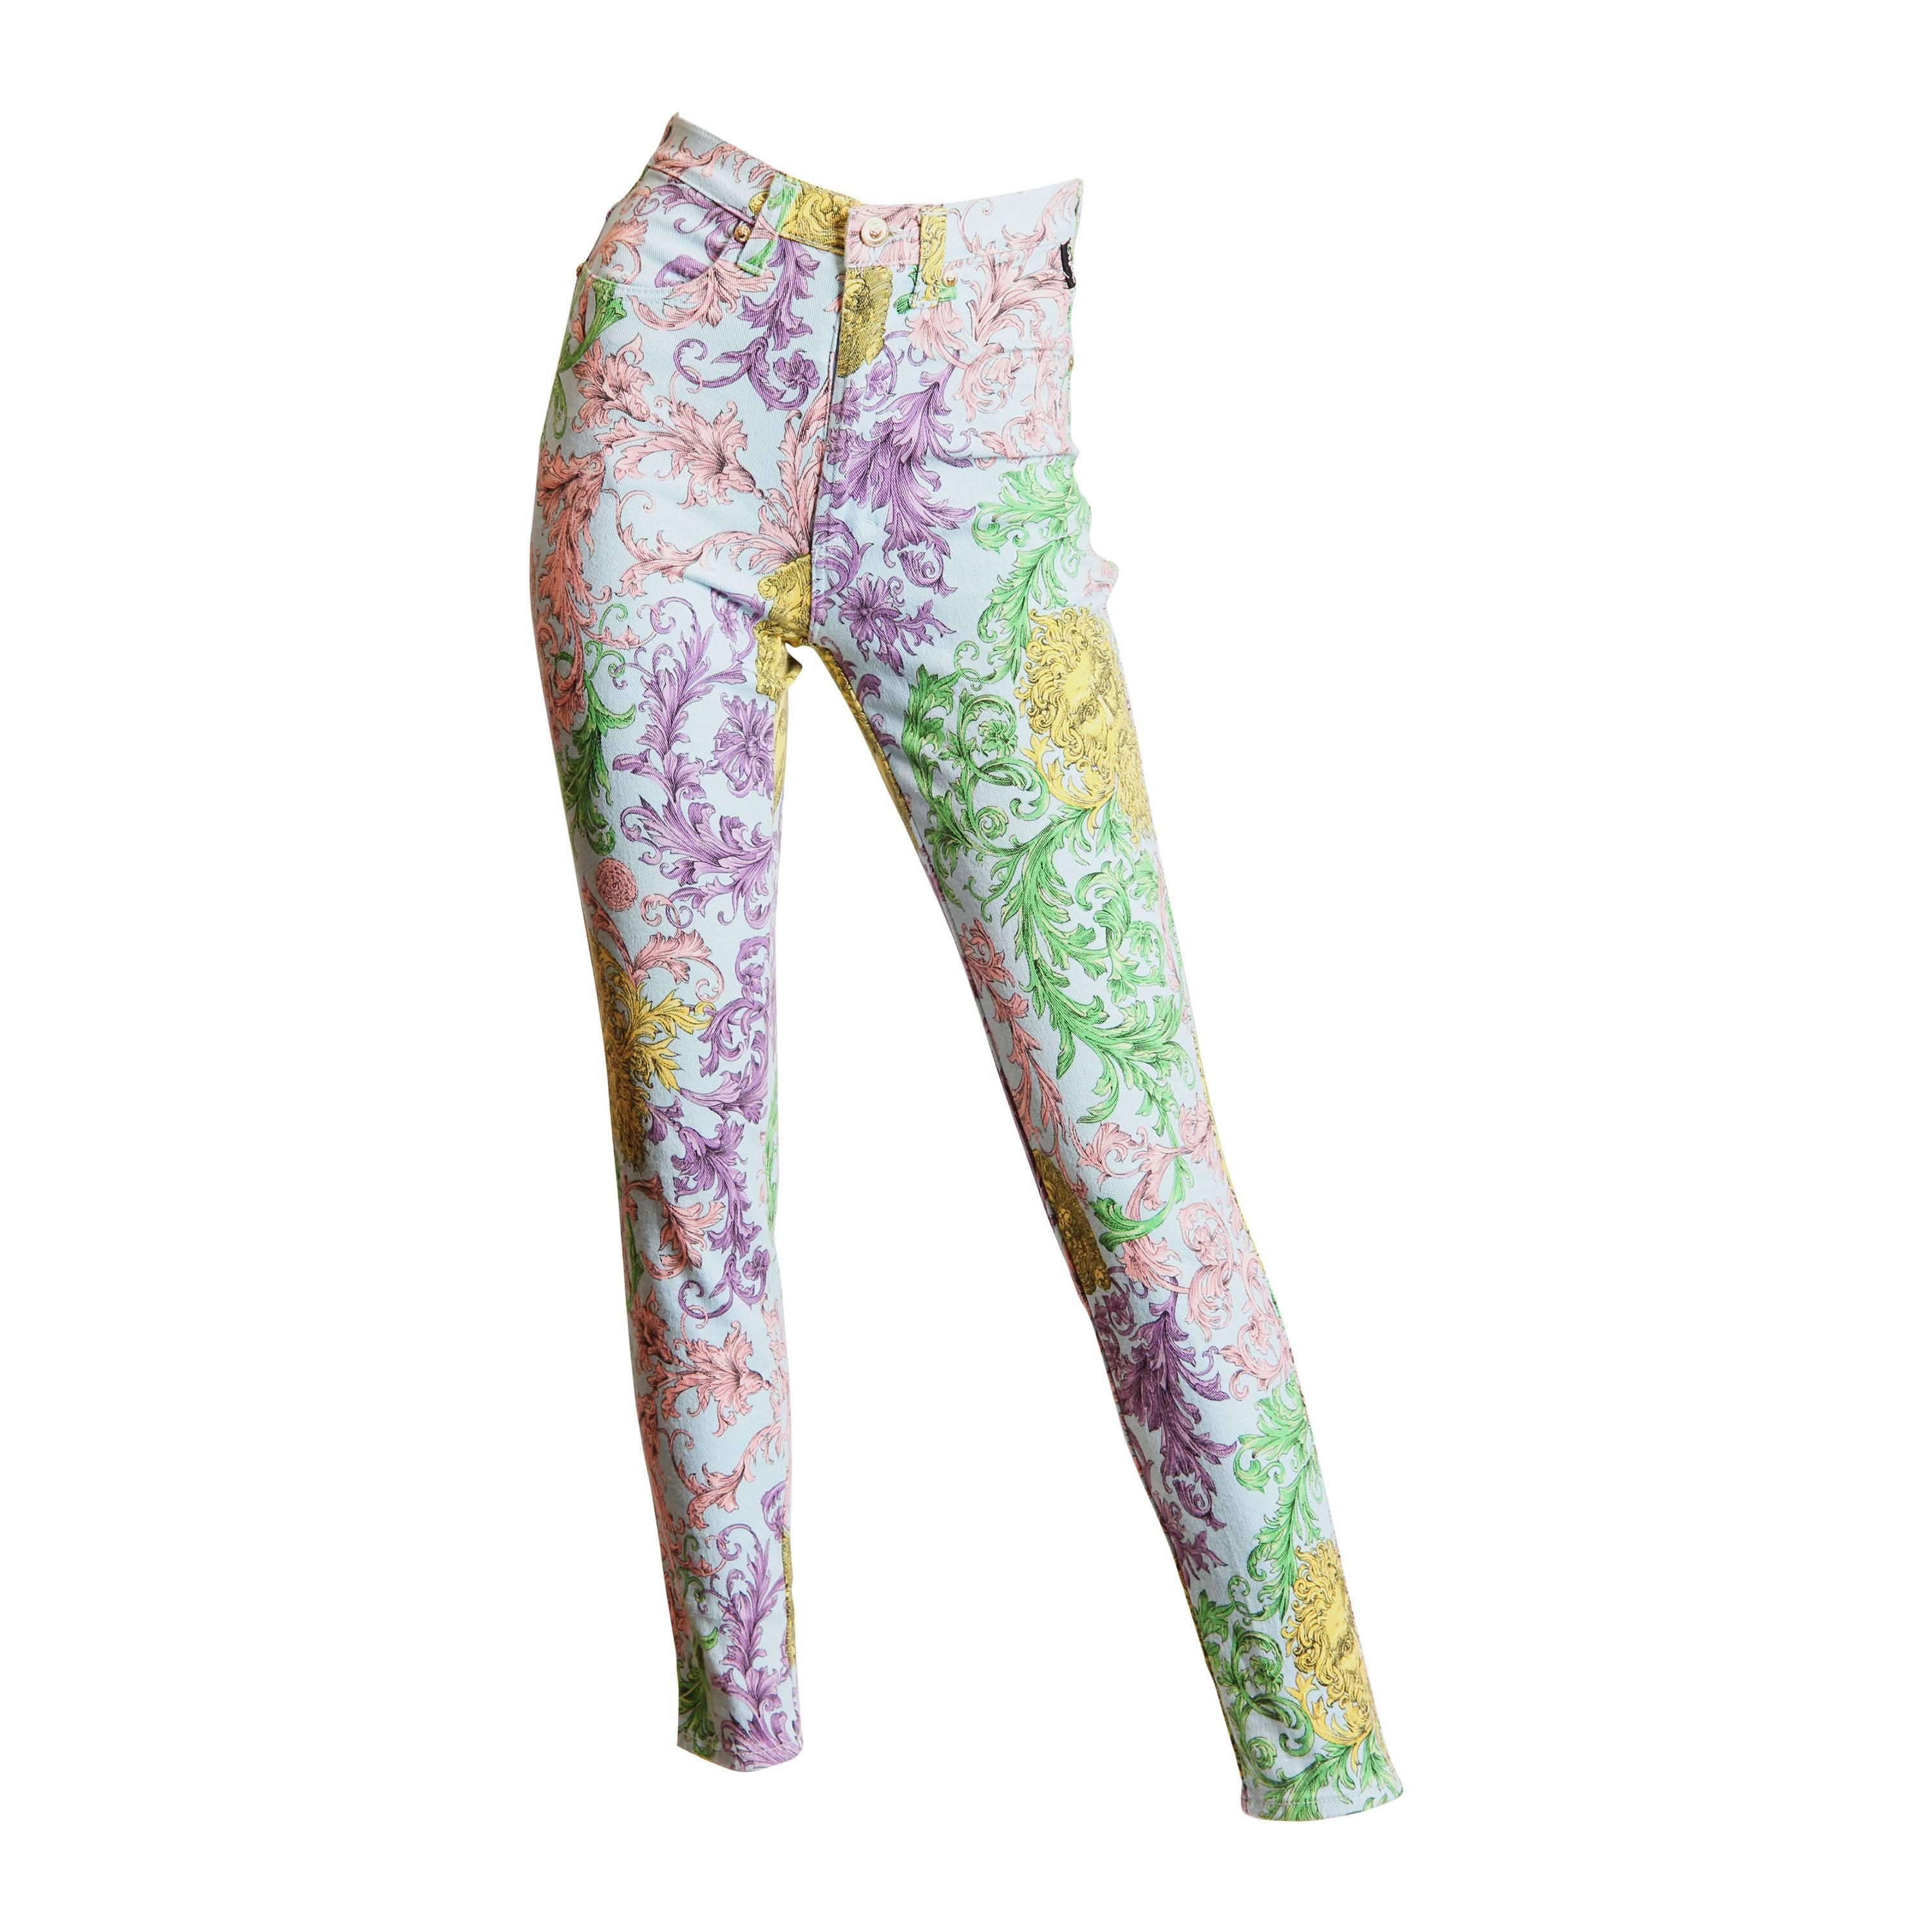 Gianni Versace Baroque Print High-Waisted Jeans